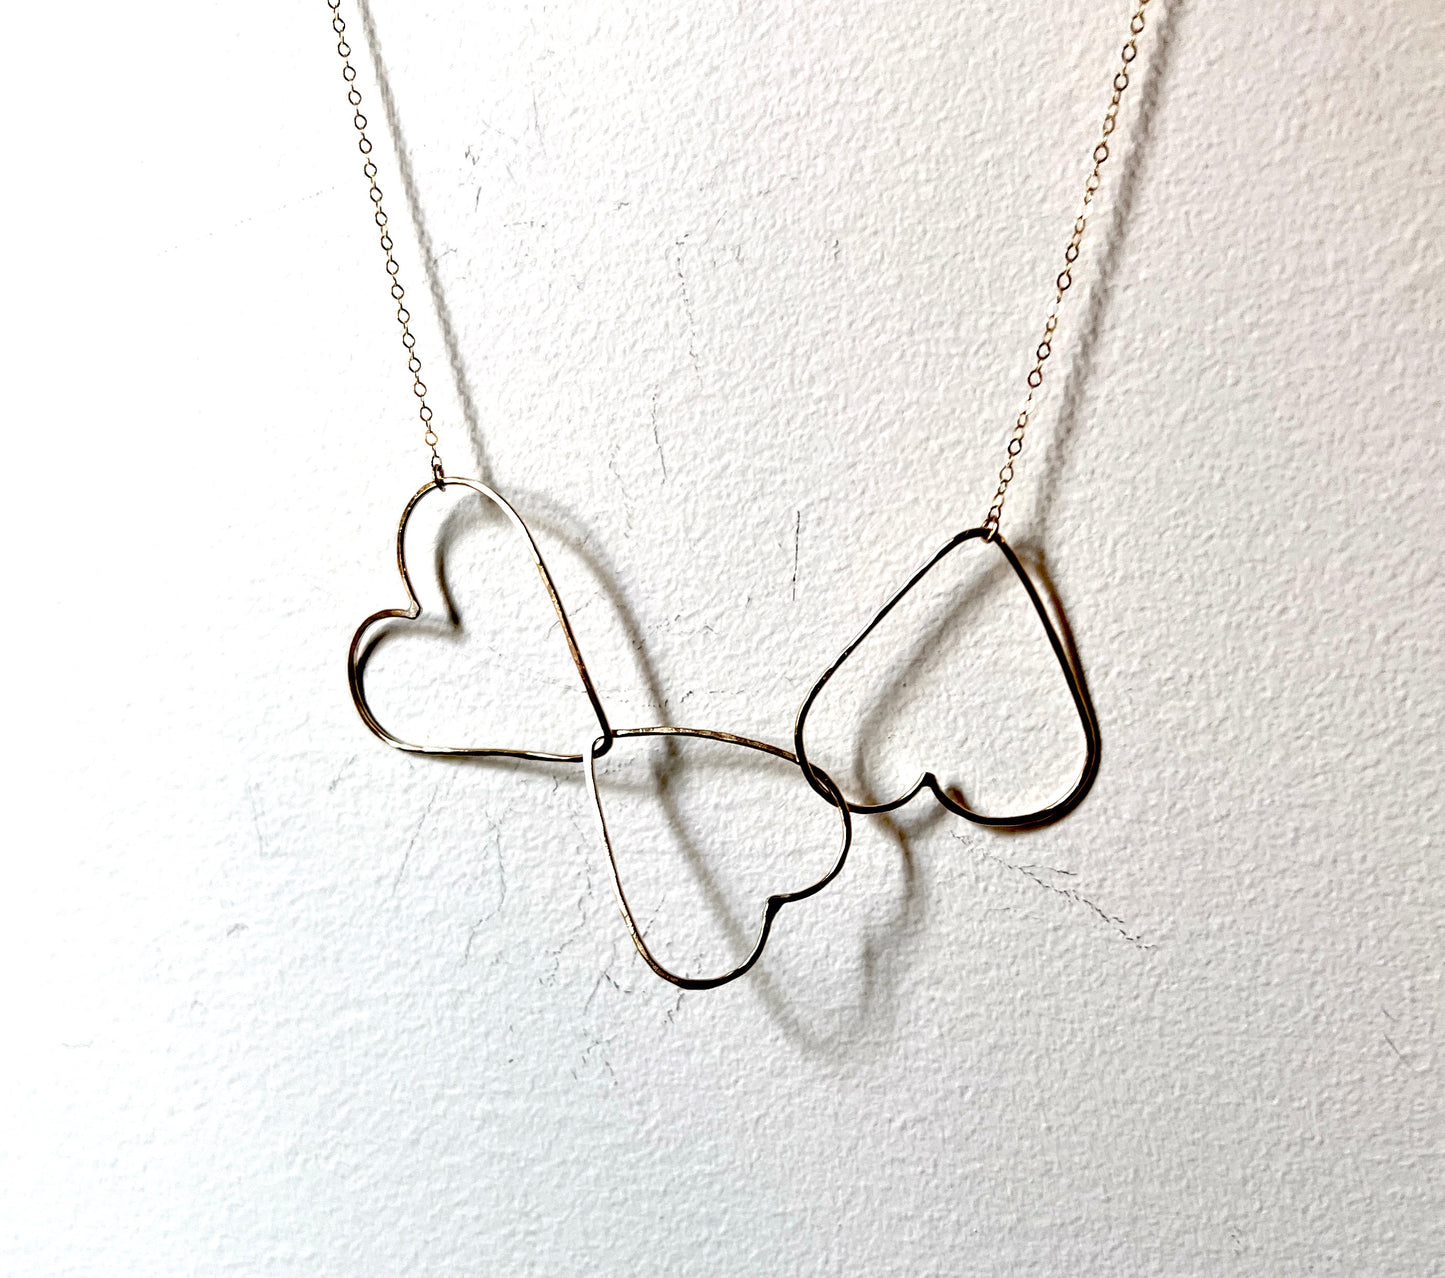 Three Big Hearts Linked Necklace Chain